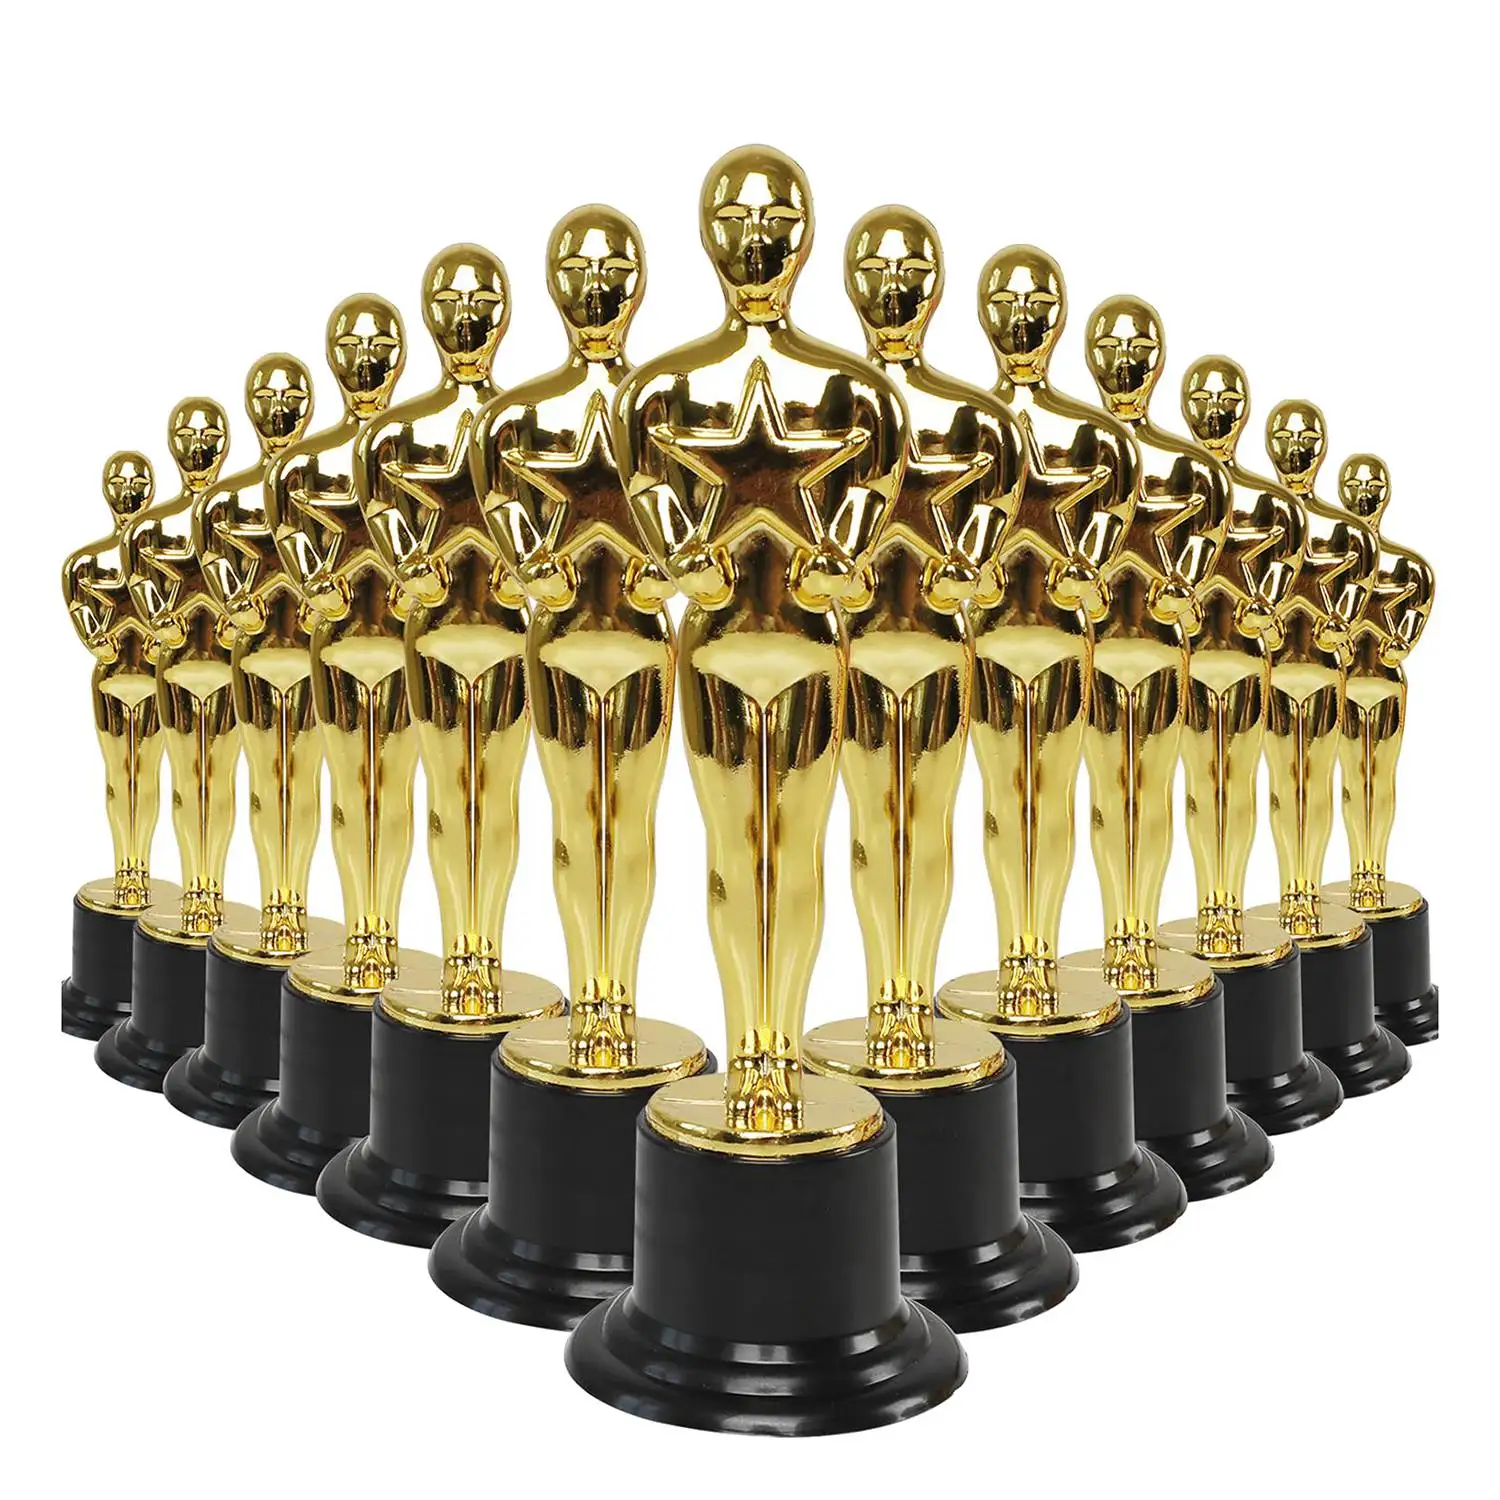 

24 Pack Plastic Gold Star Award Trophies Statuette for Party Favors School Award Game Prize Party Prize